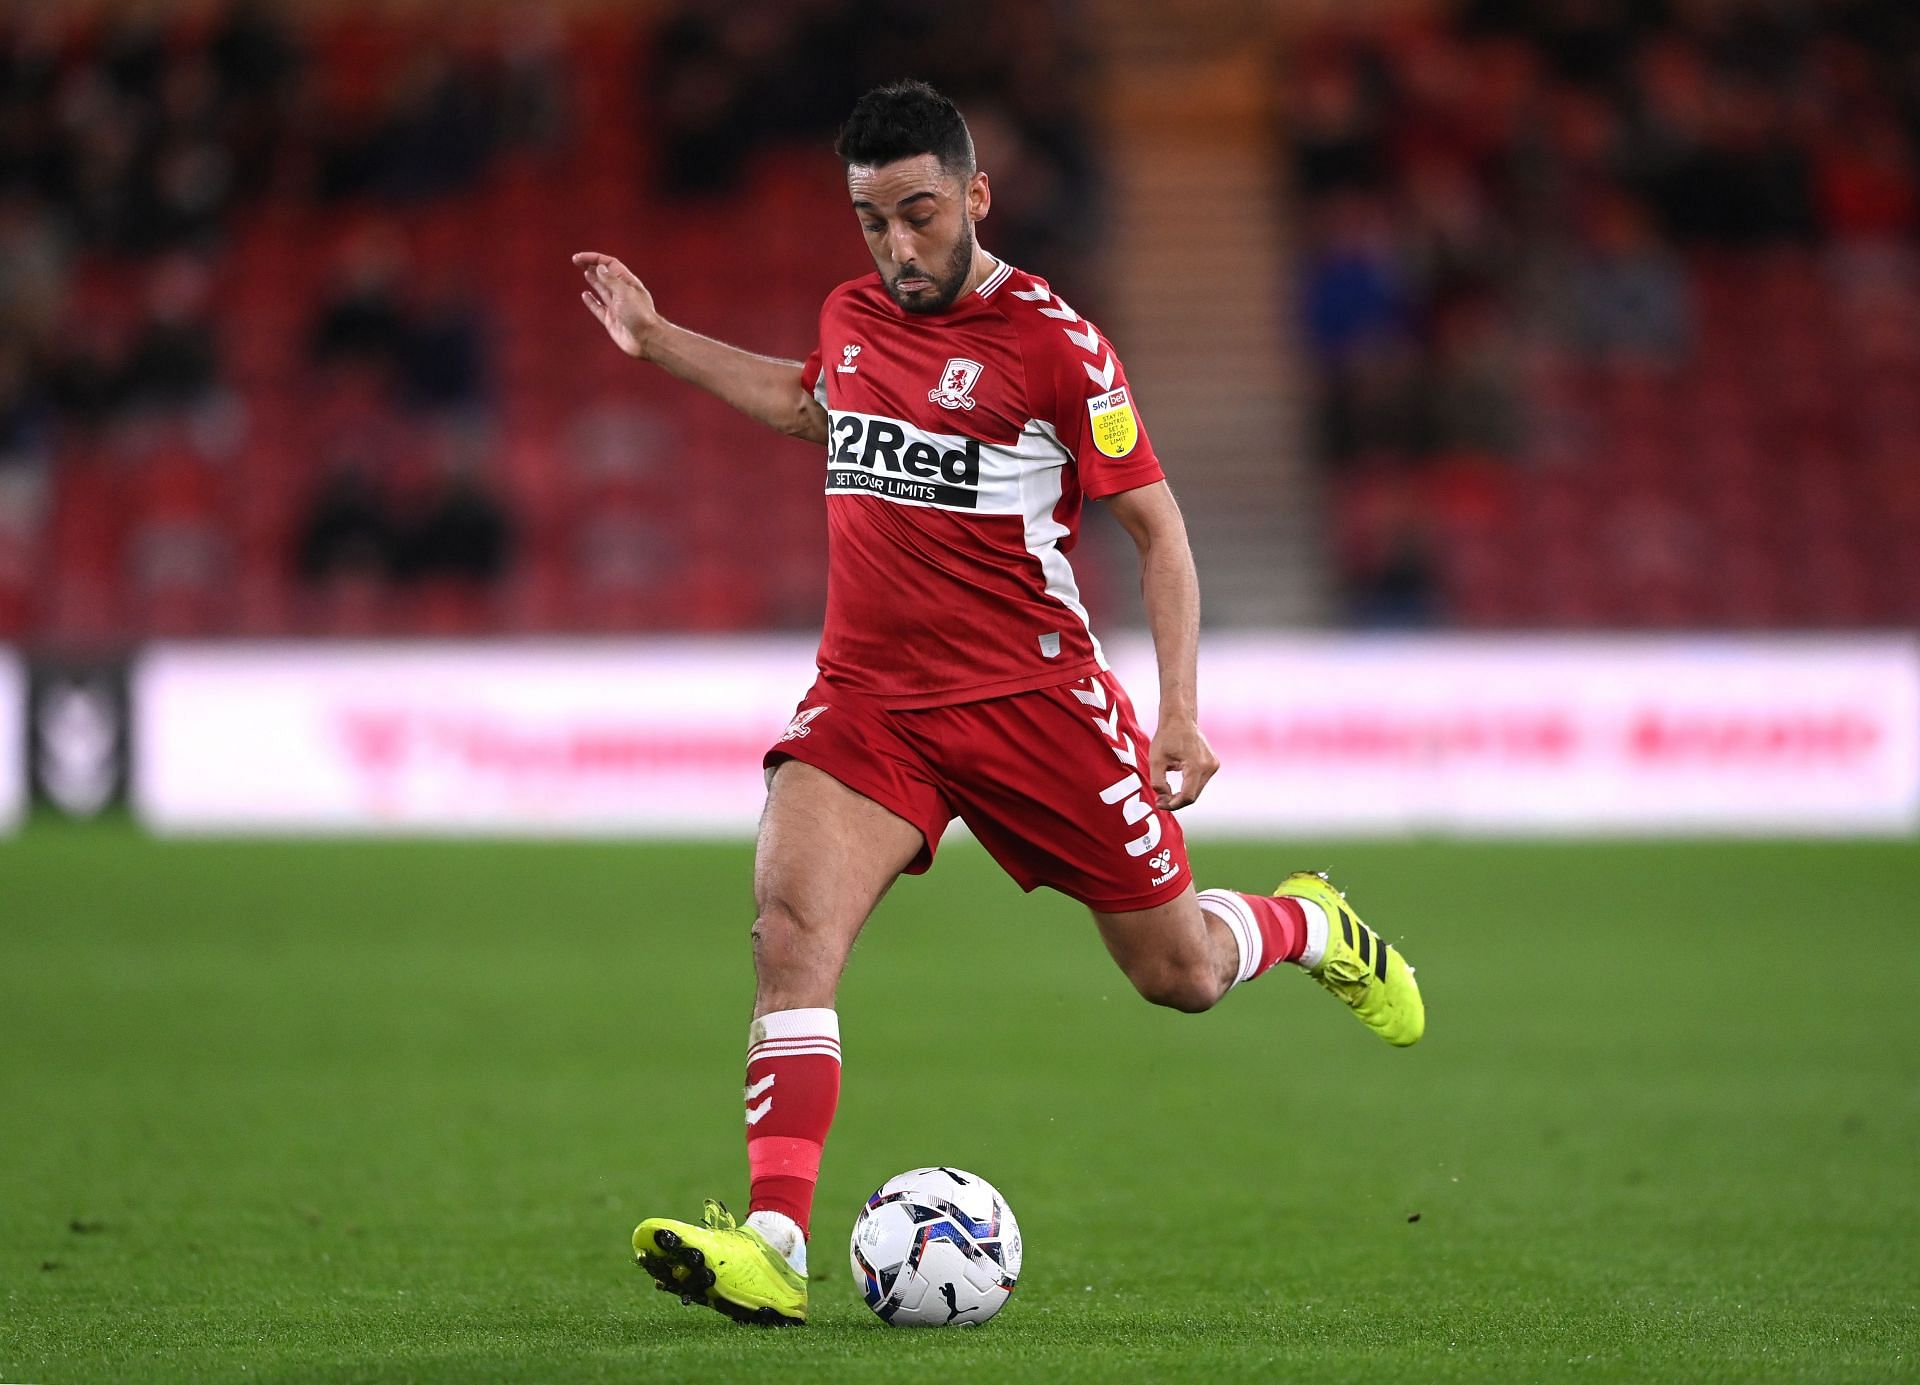 Middlesbrough will face Cardiff City on Wednesday - Sky Bet Championship